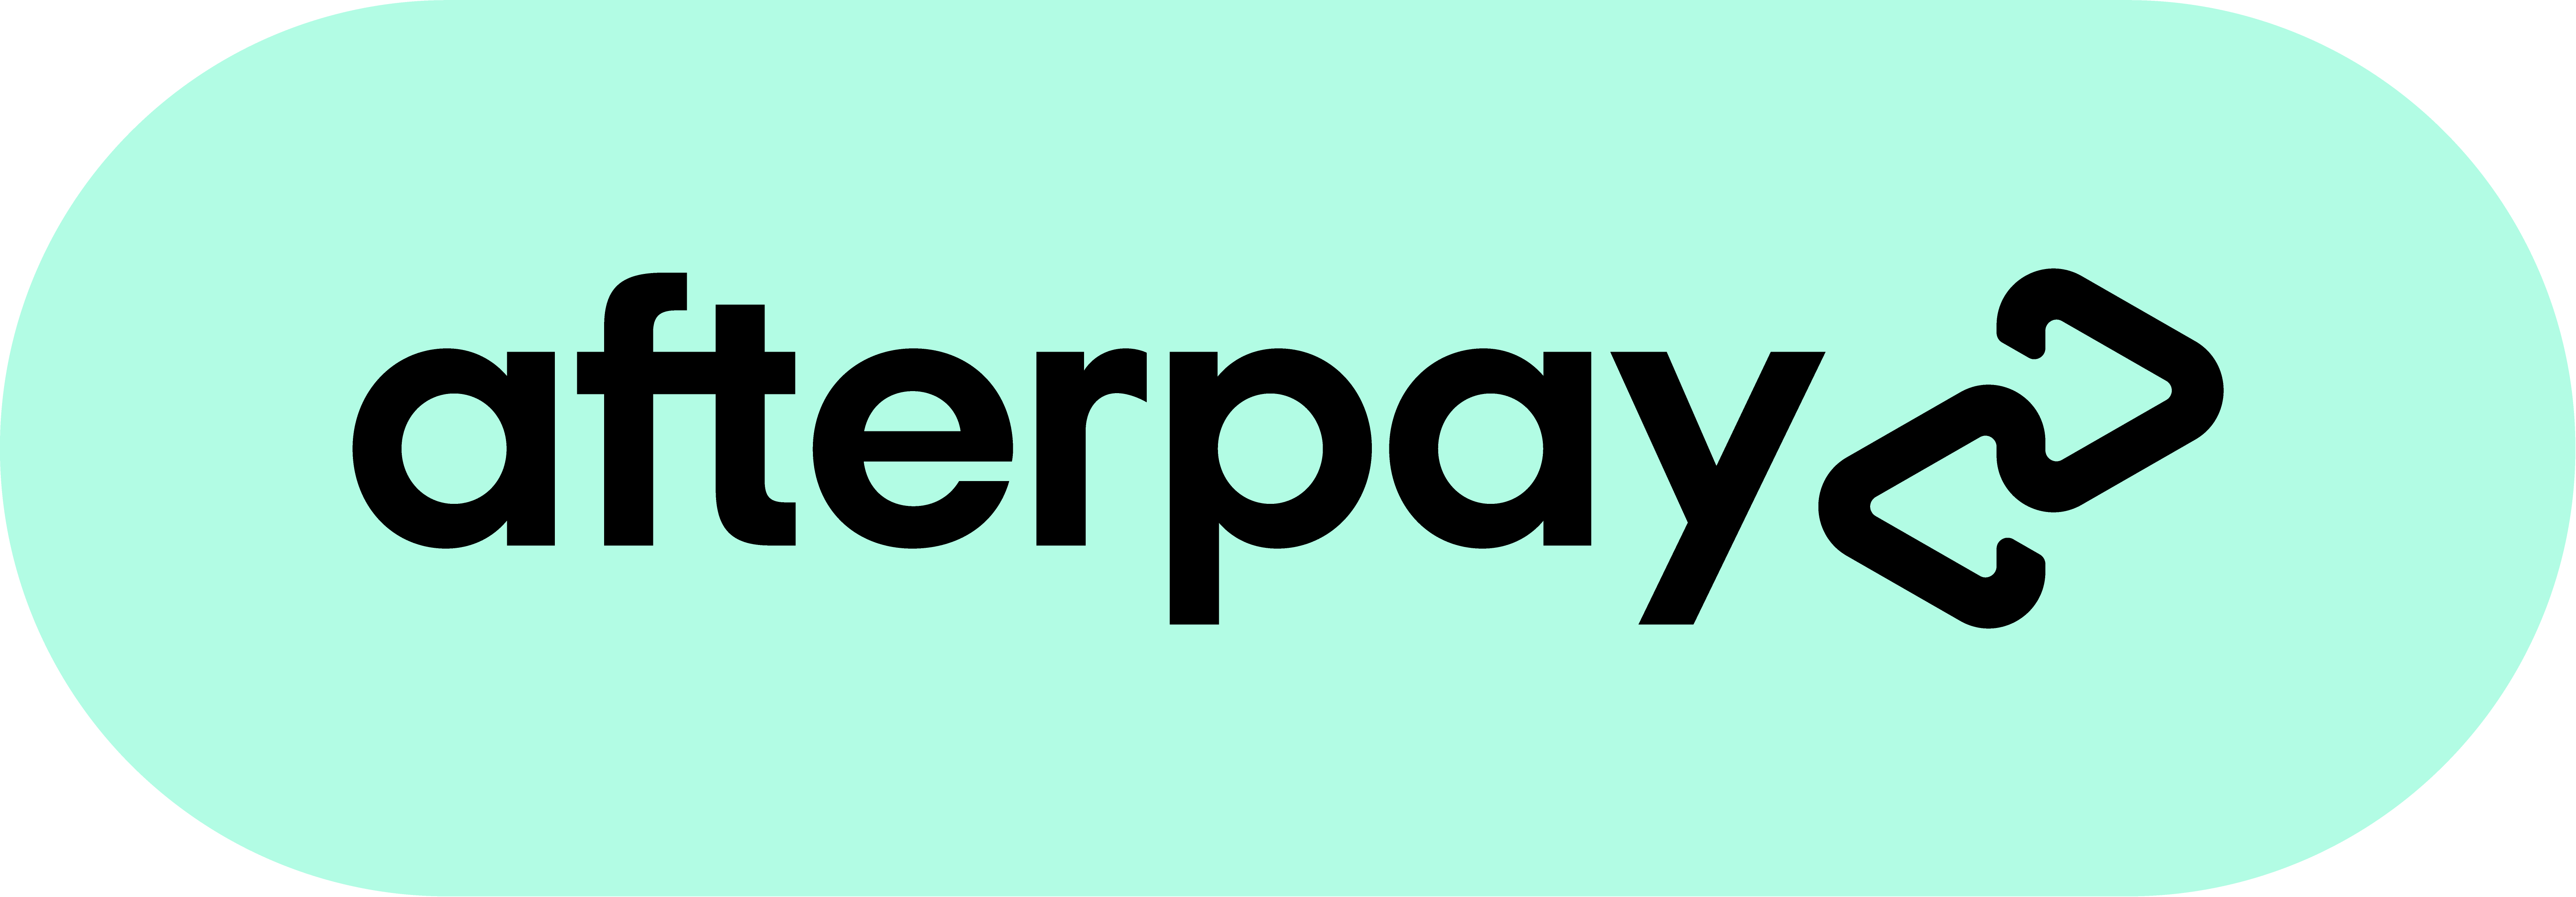 afterpay logo png